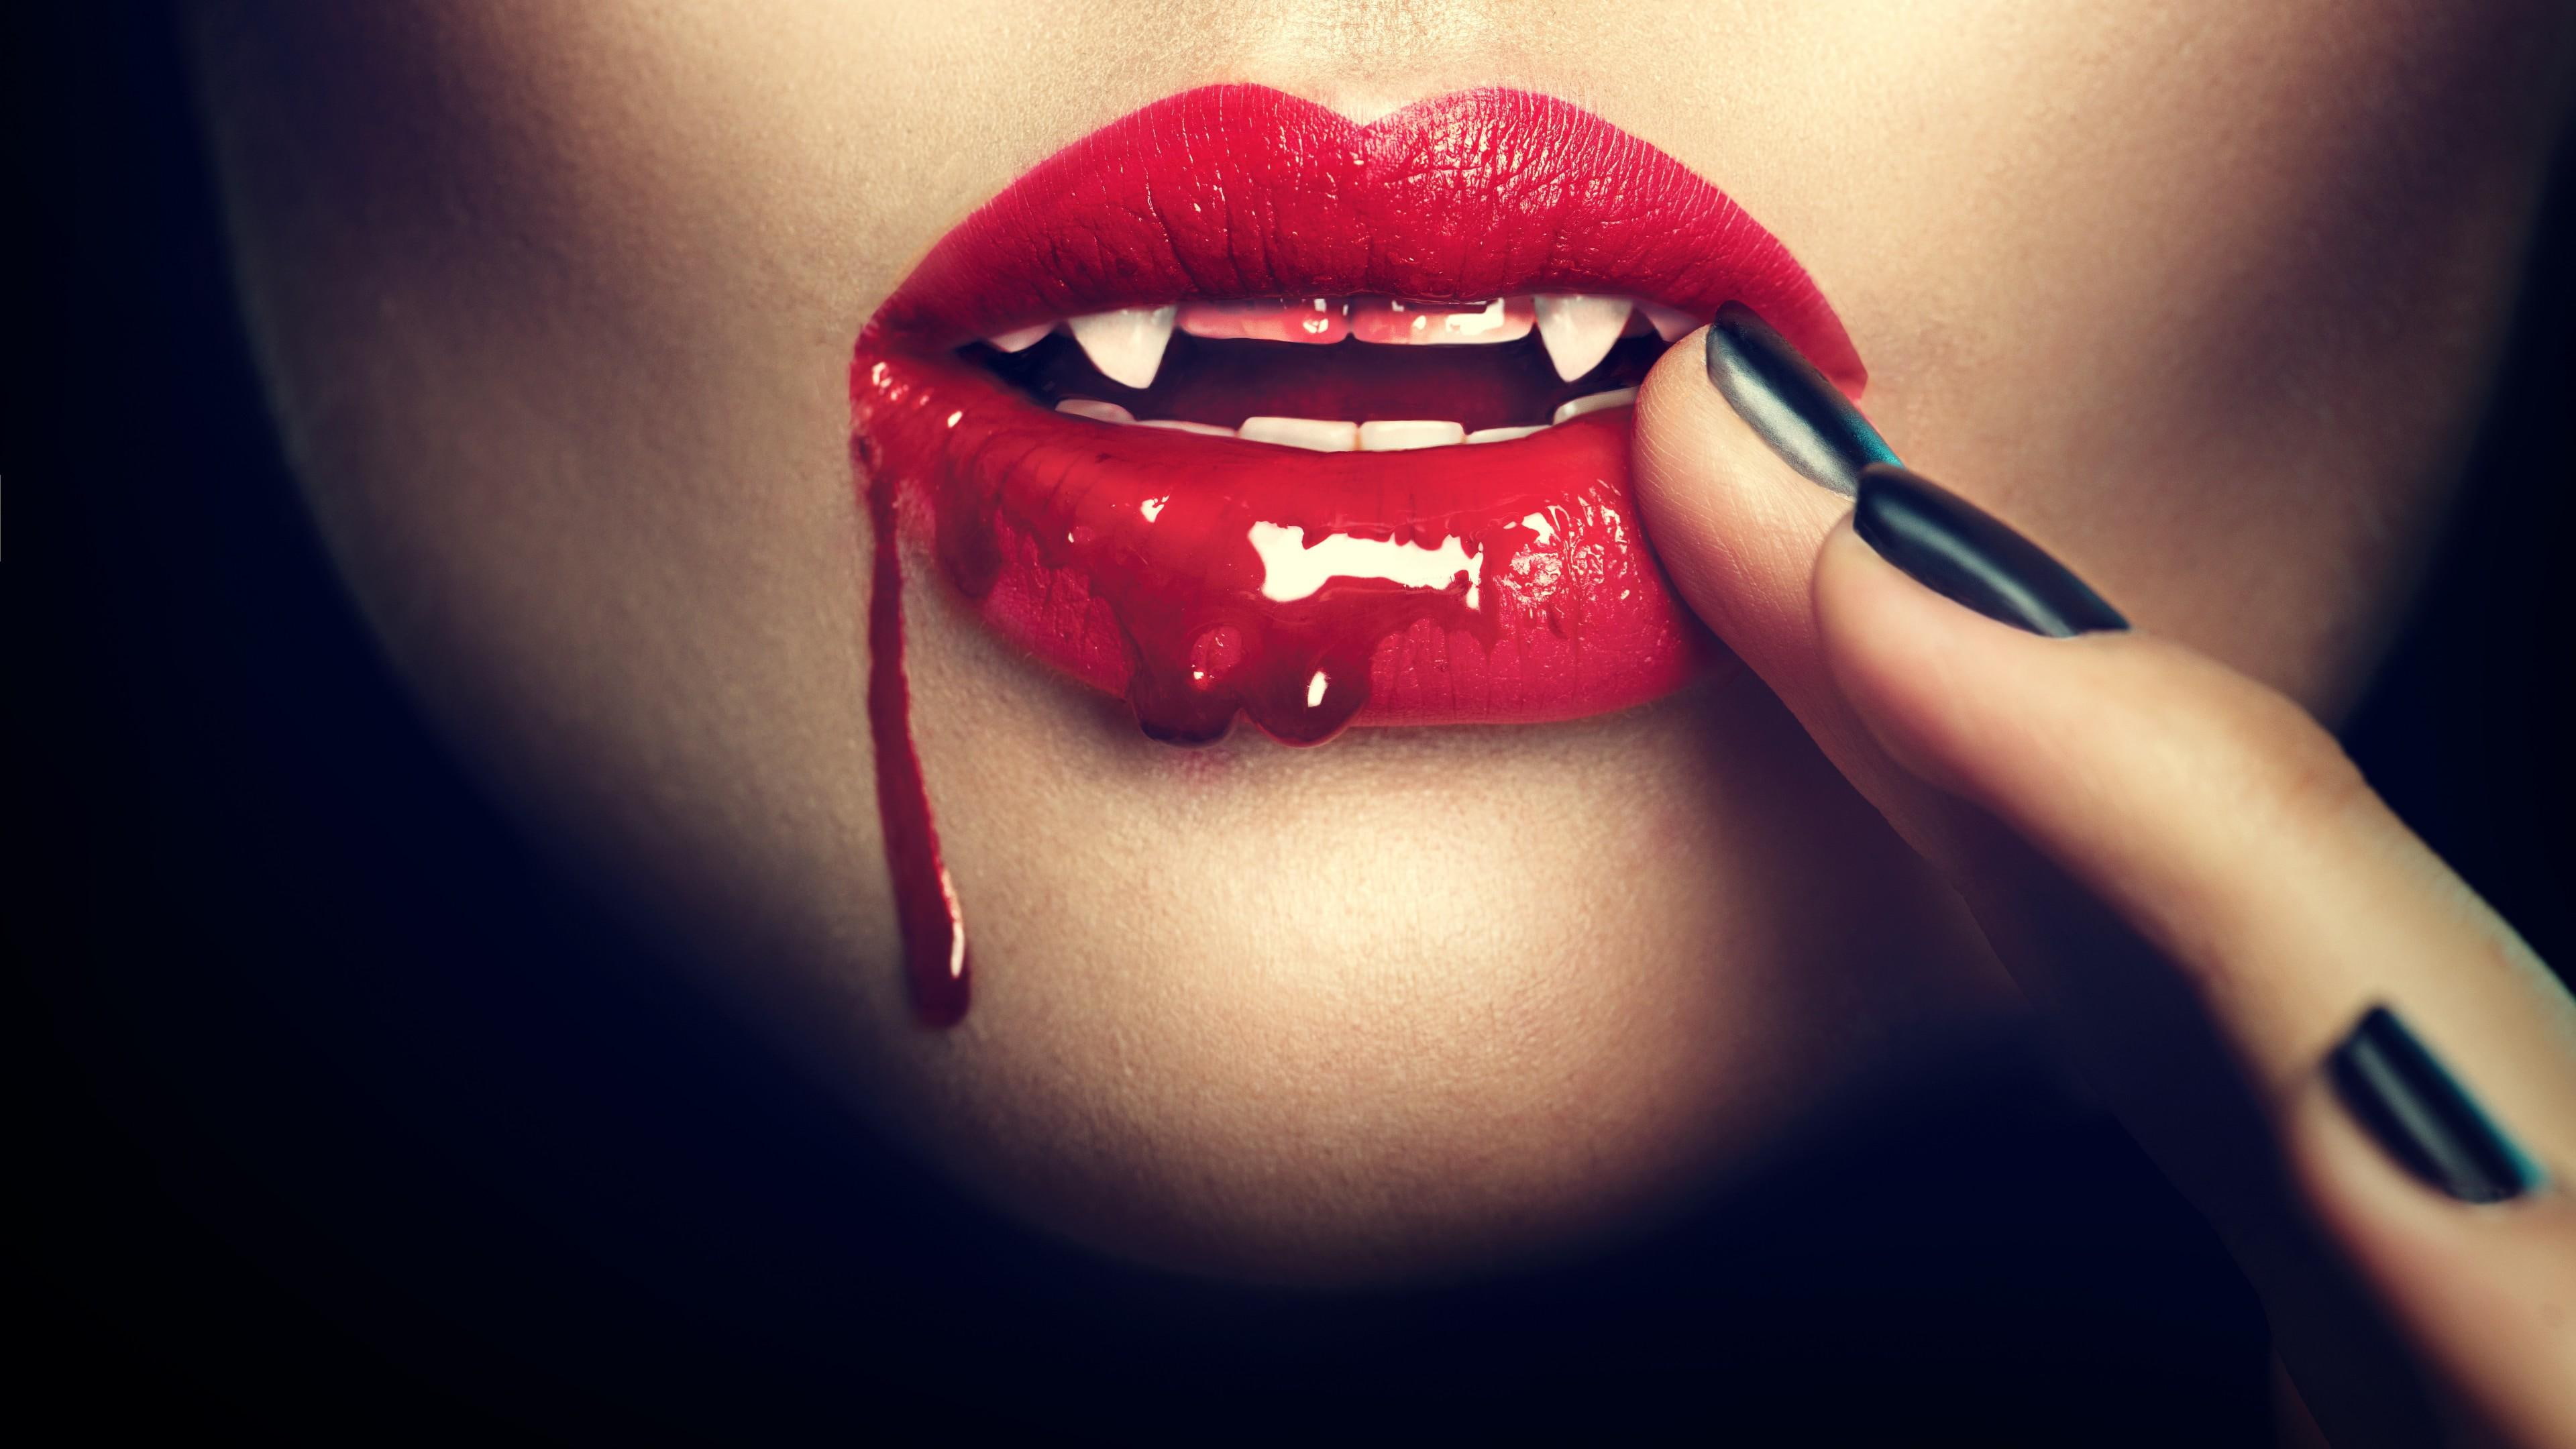 lip, nail, vampire, mouth, finger, hand, woman, bloody, sexy